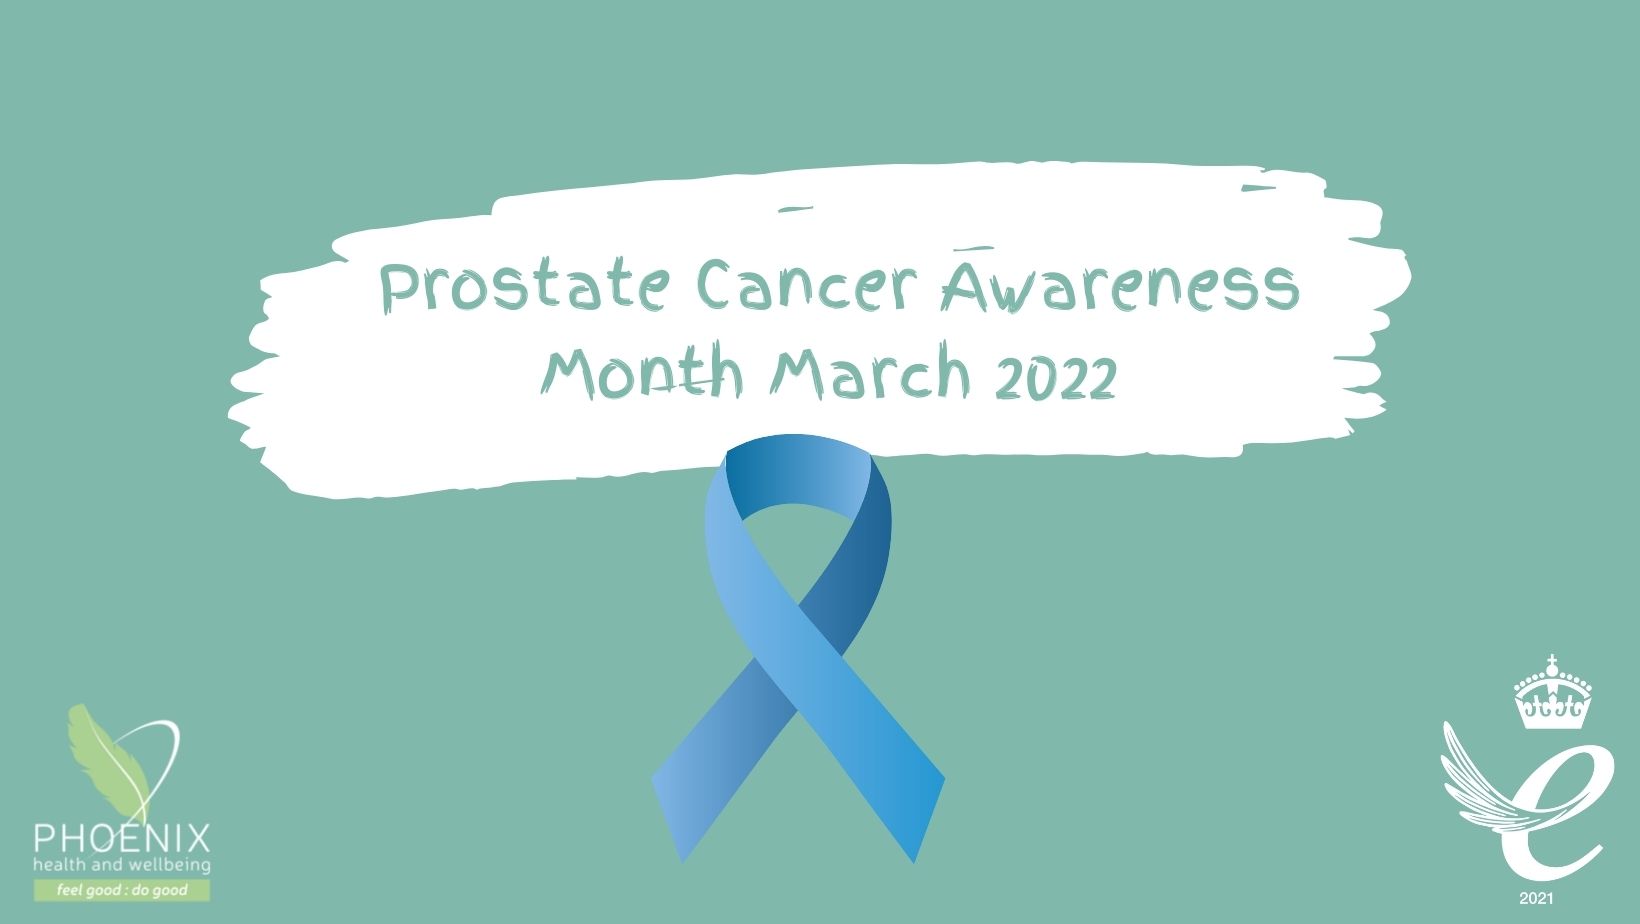 Prostate Cancer Awareness Month March 2022